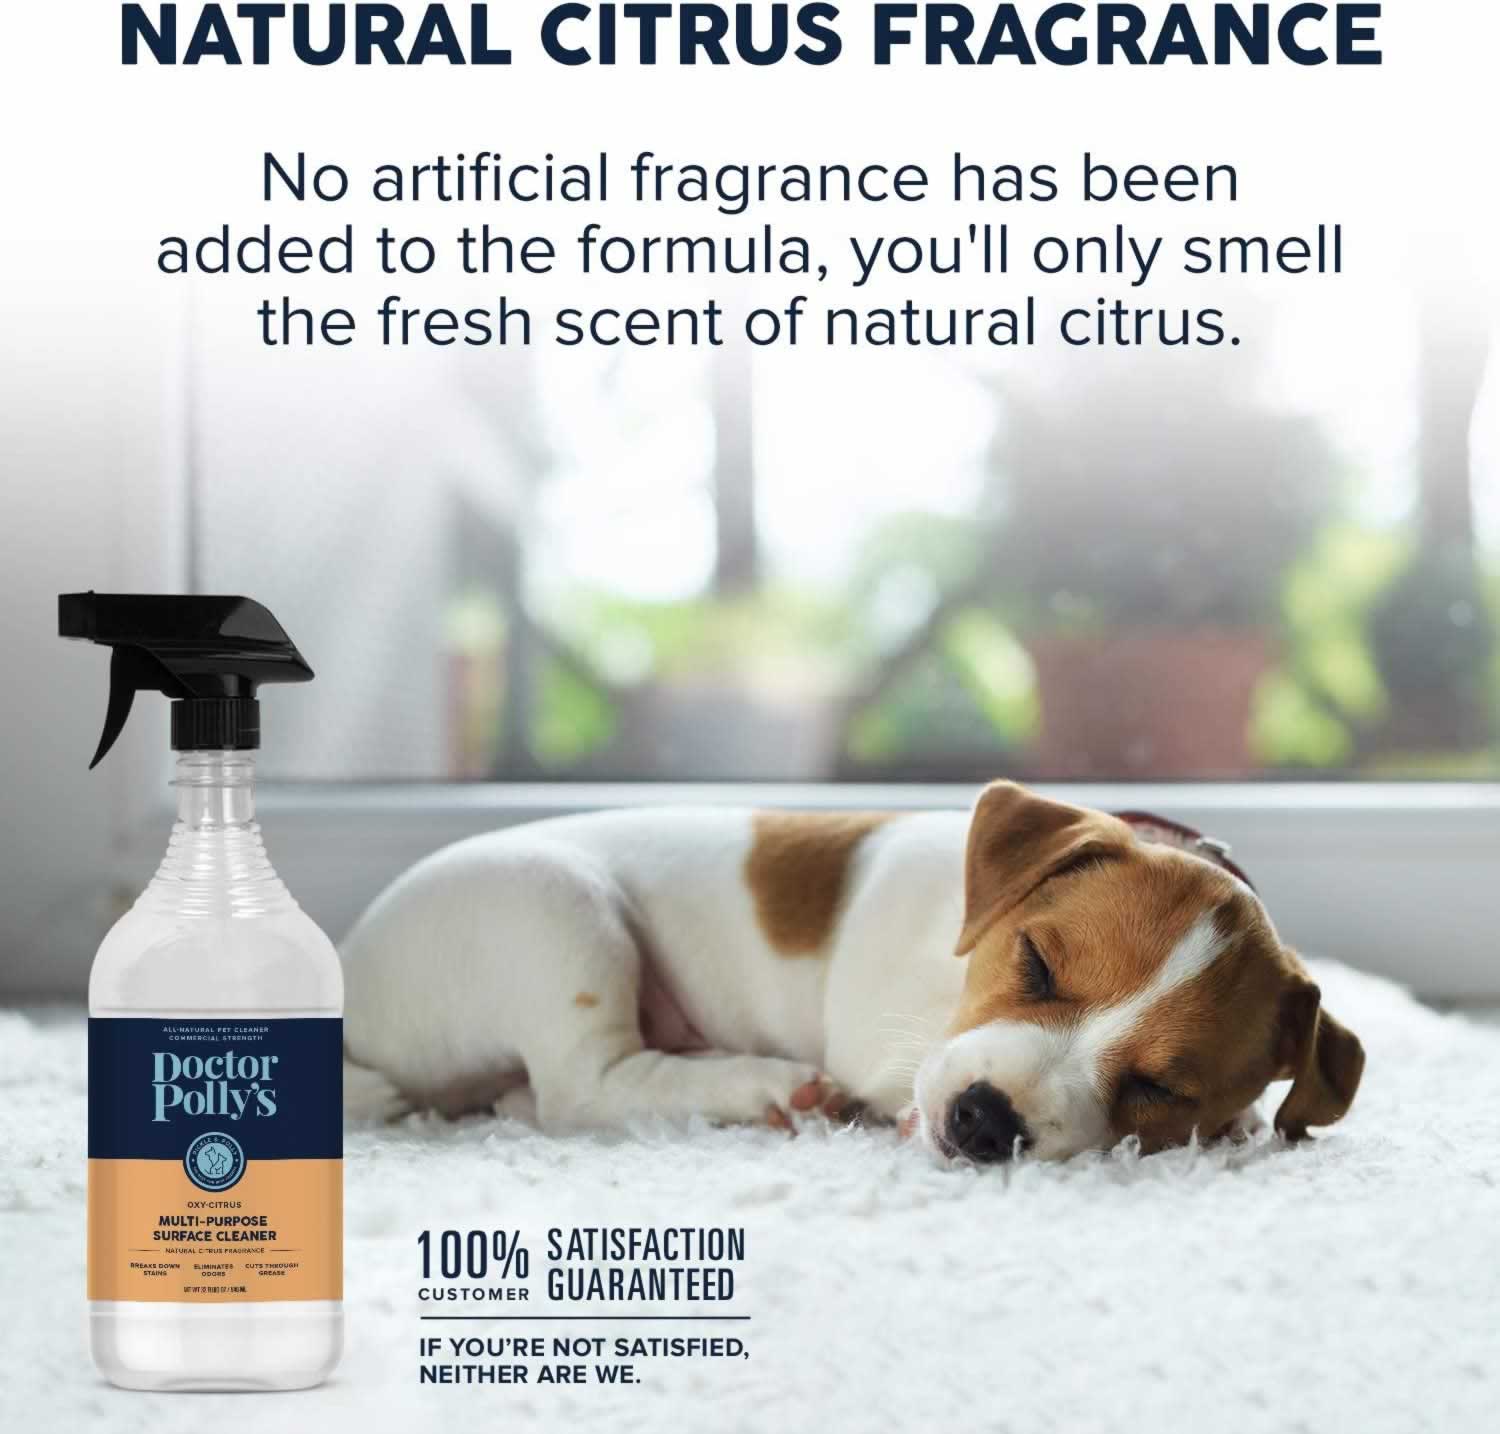 A puppy sleeping on a bed with a bottle of Dr. Polly's Oxy All Purpose Cleaner in the foreground. The text reads, "Natural Citrus Fragrance. No artificial fragrance has been added to this formula, you'll only smell the fresh scent of natural citrus. 100% customer satisfaction guaranteed. If you're not satisfied, neither are we."